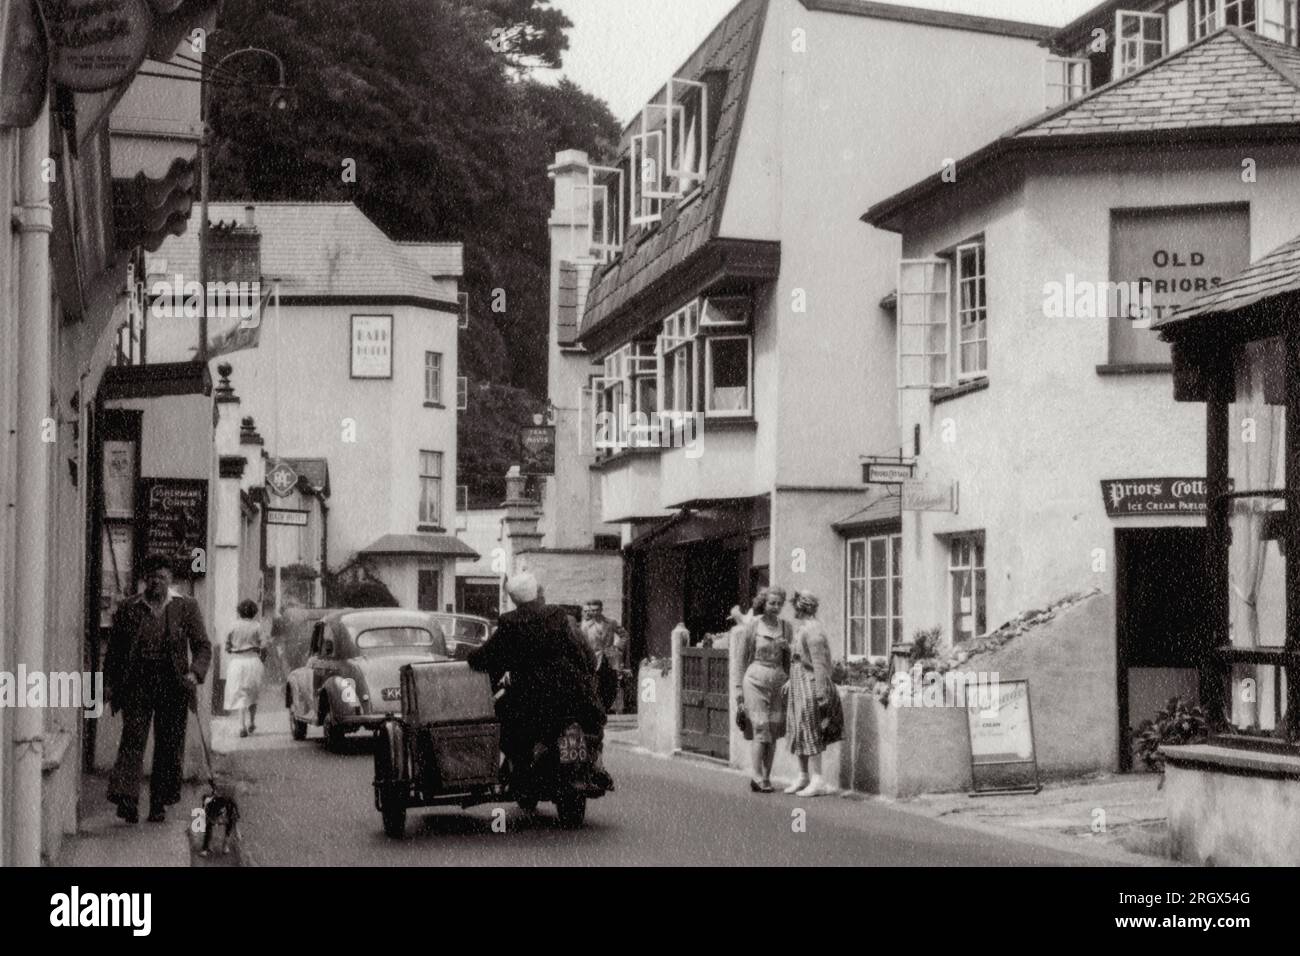 Bustling coastal tourist town of Lynmouth, Devon, England, complete with ice cream parlour, in the summer of 1952.  This photograph was taken approximately three weeks before the Lynmouth flood disaster, which occurred on the night of Friday 15 August 1952. Stock Photo